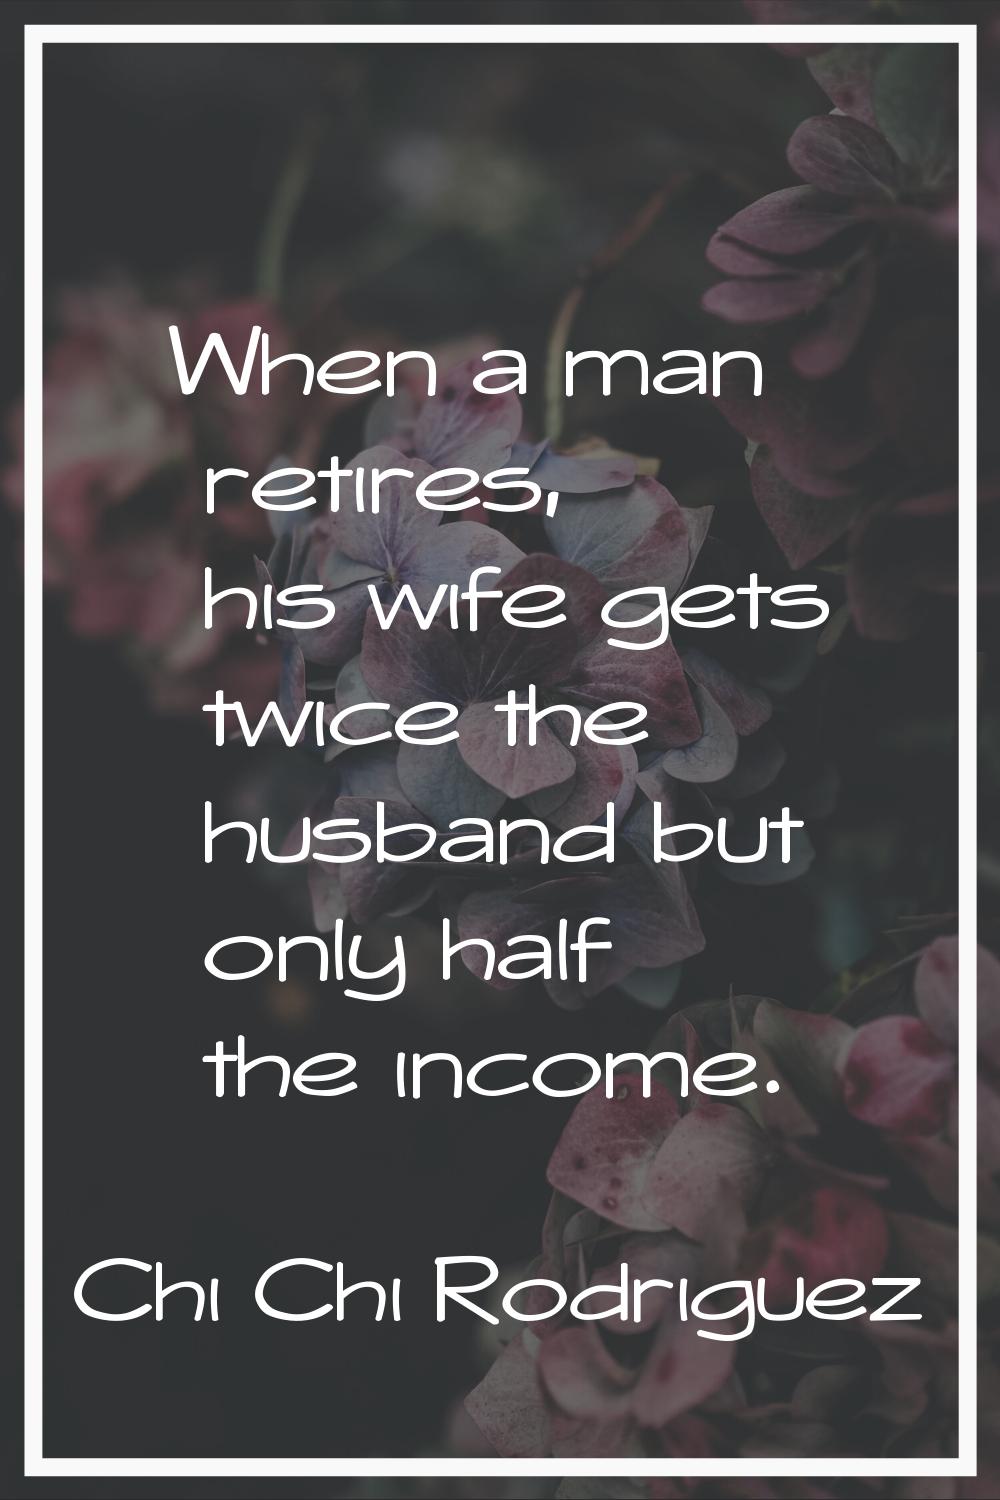 When a man retires, his wife gets twice the husband but only half the income.